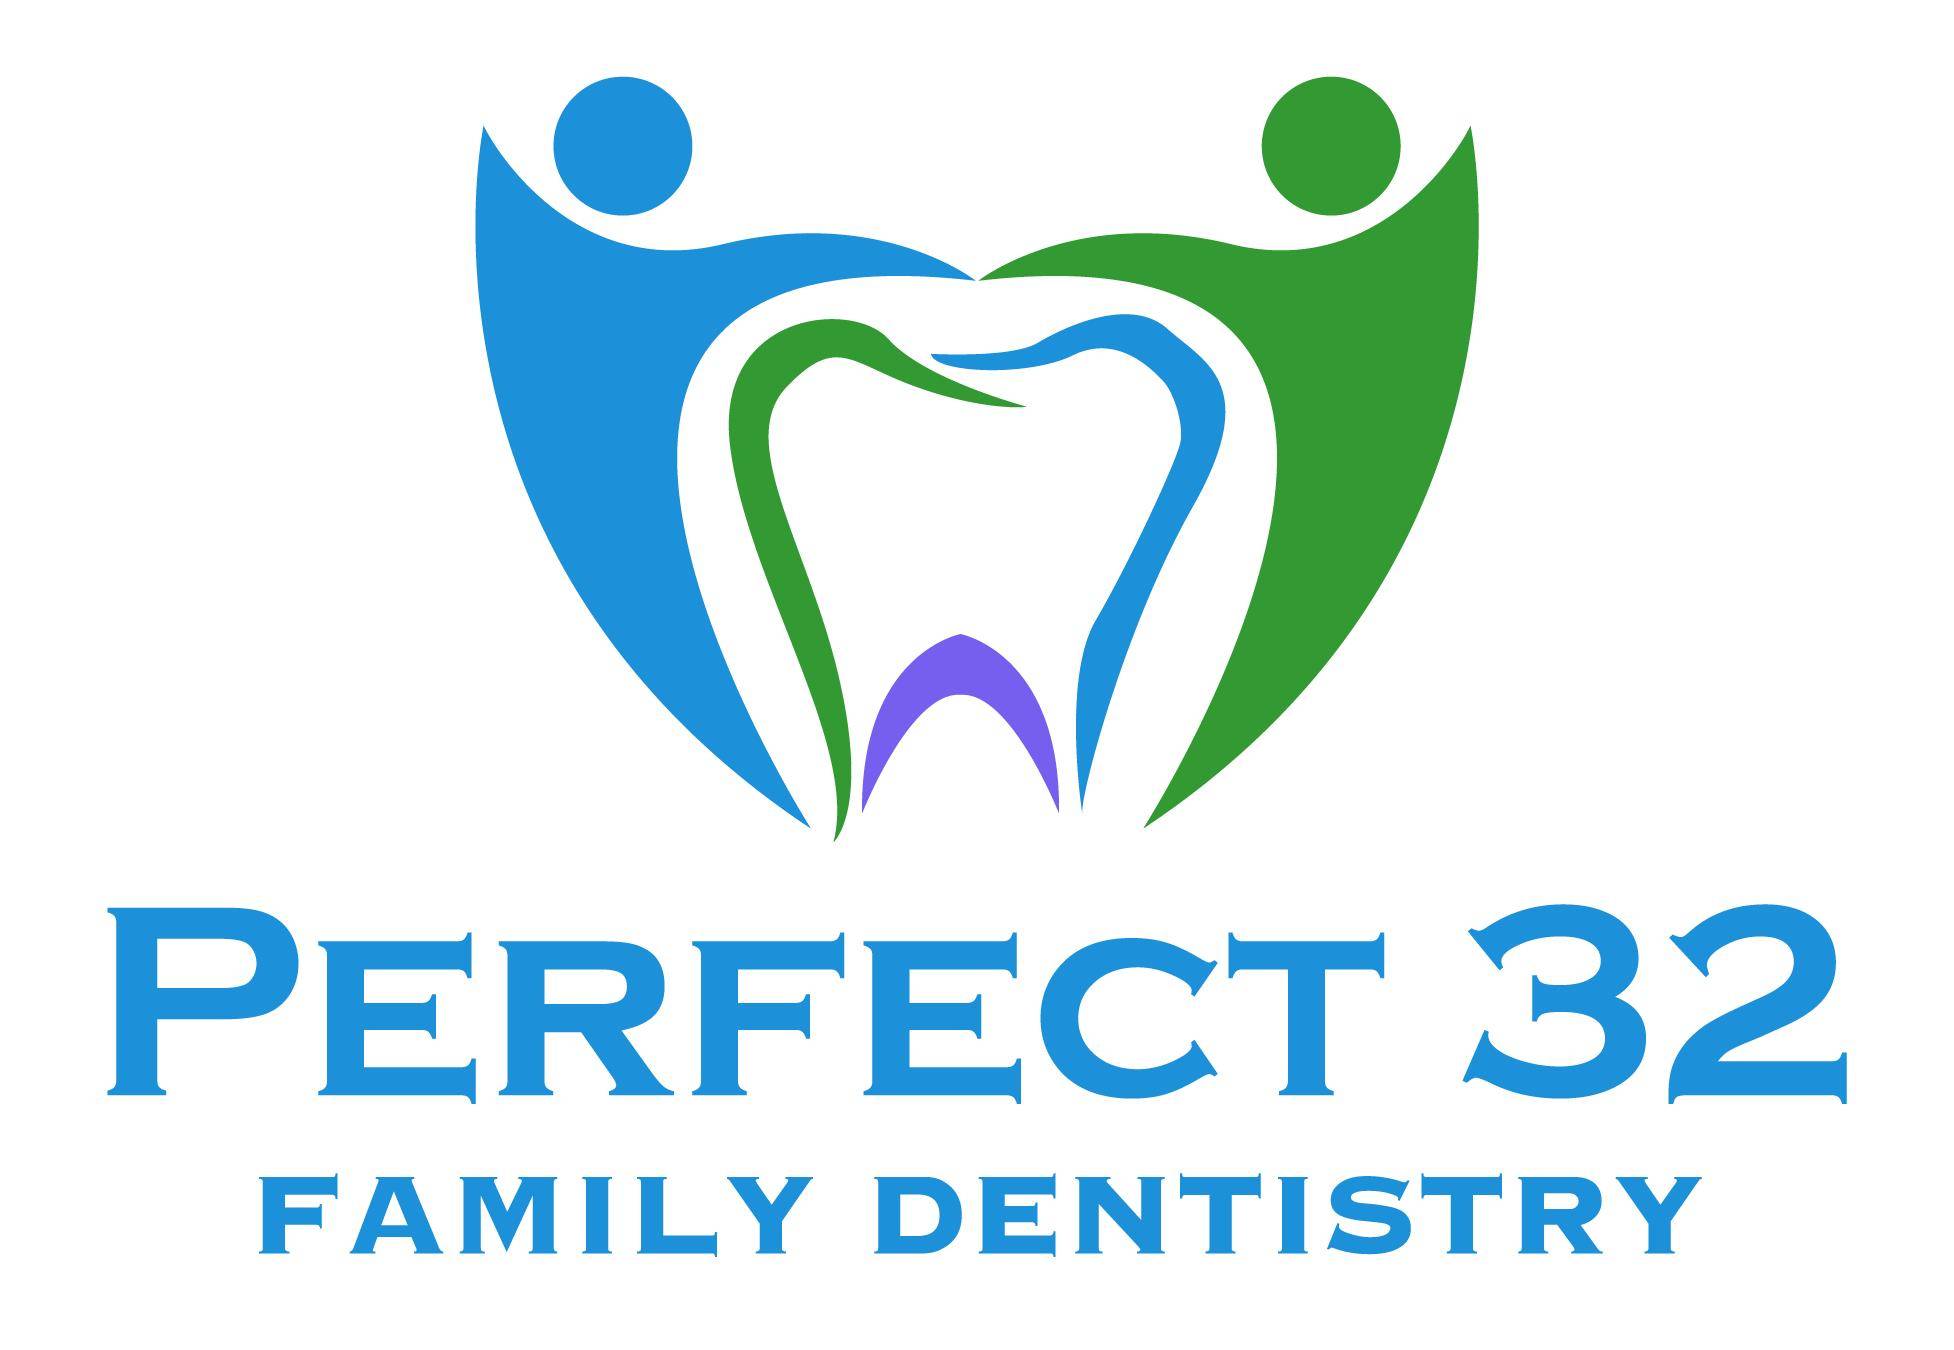 Perfect 32 Family Dentistry | 3630 N Shiloh Rd #209, Garland, TX 75044, United States | Phone: (469) 804-5677